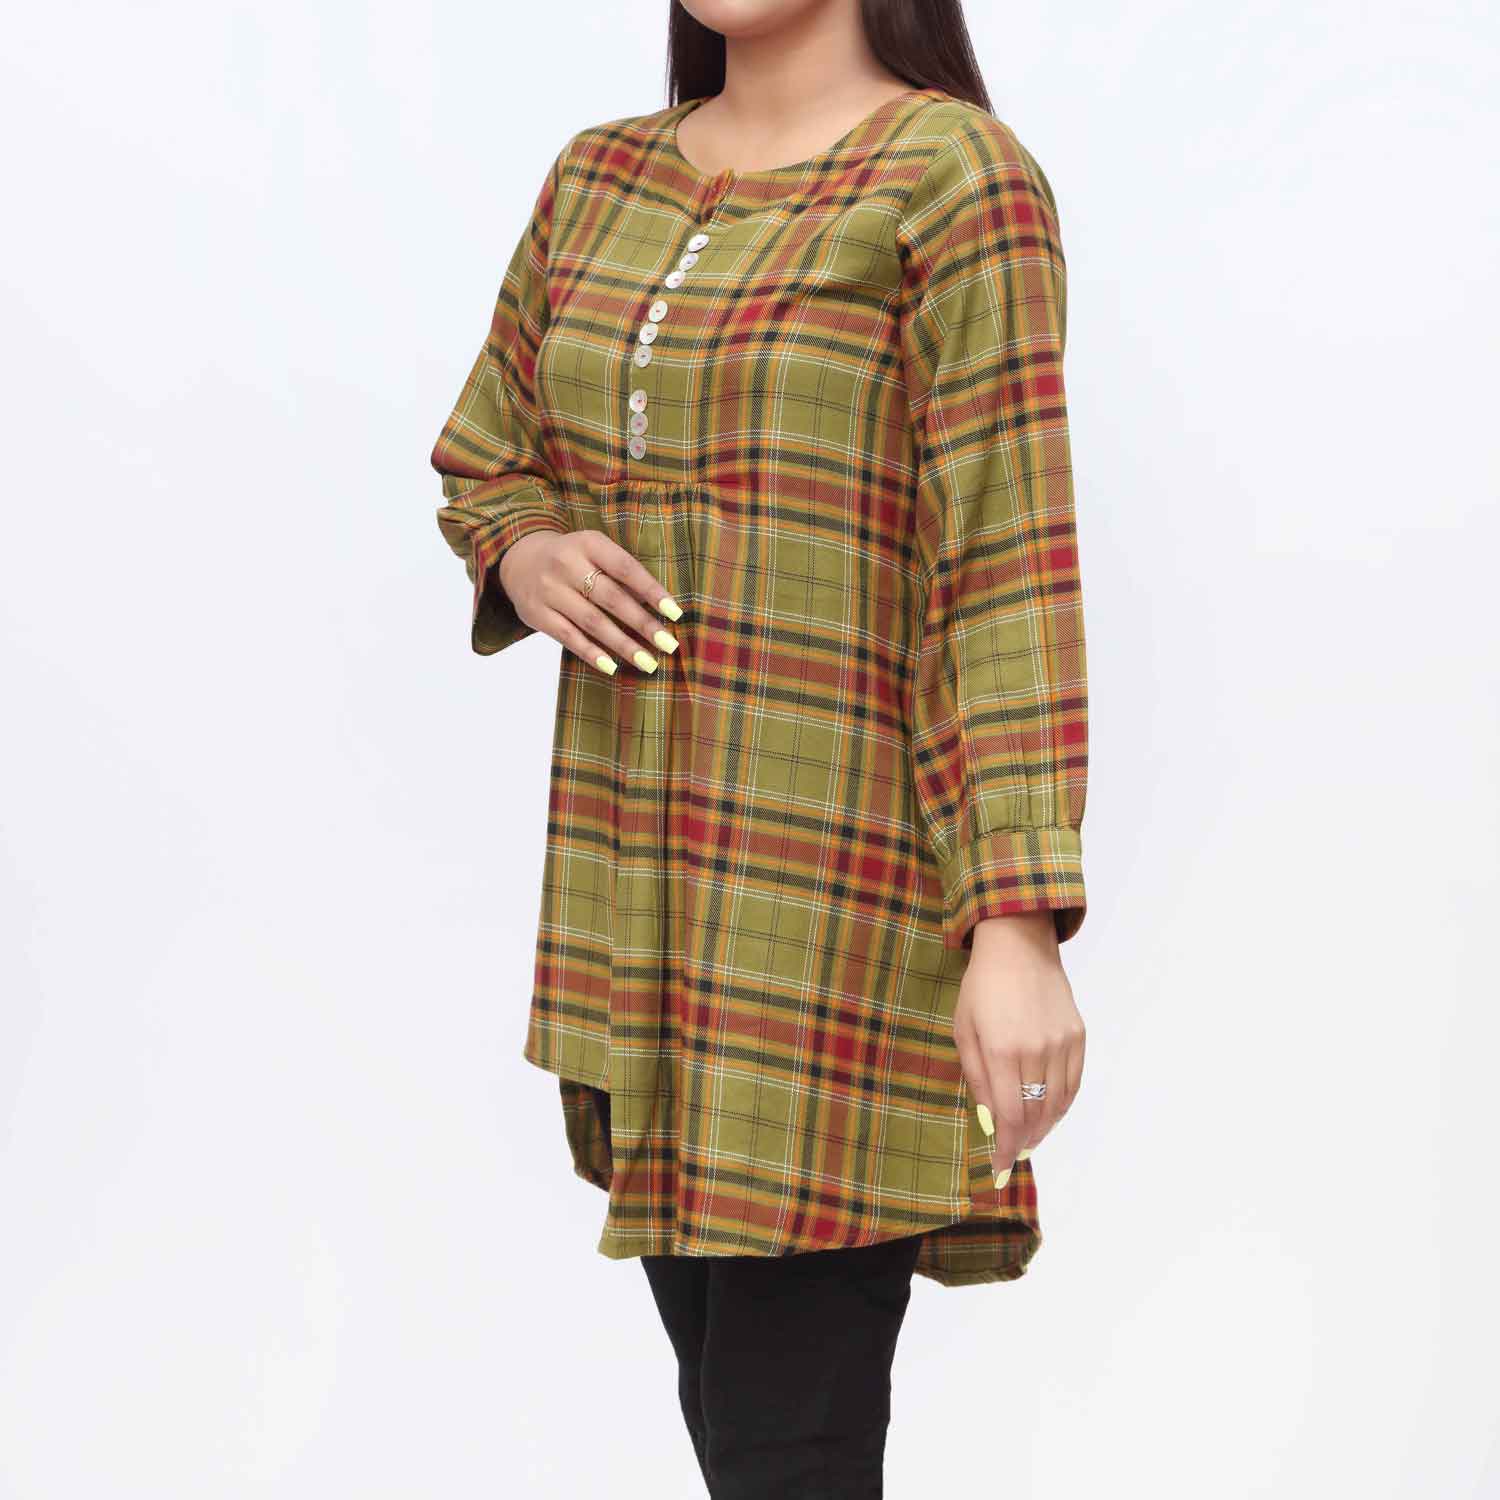 1PC- Flannel Checkered Top PW9040